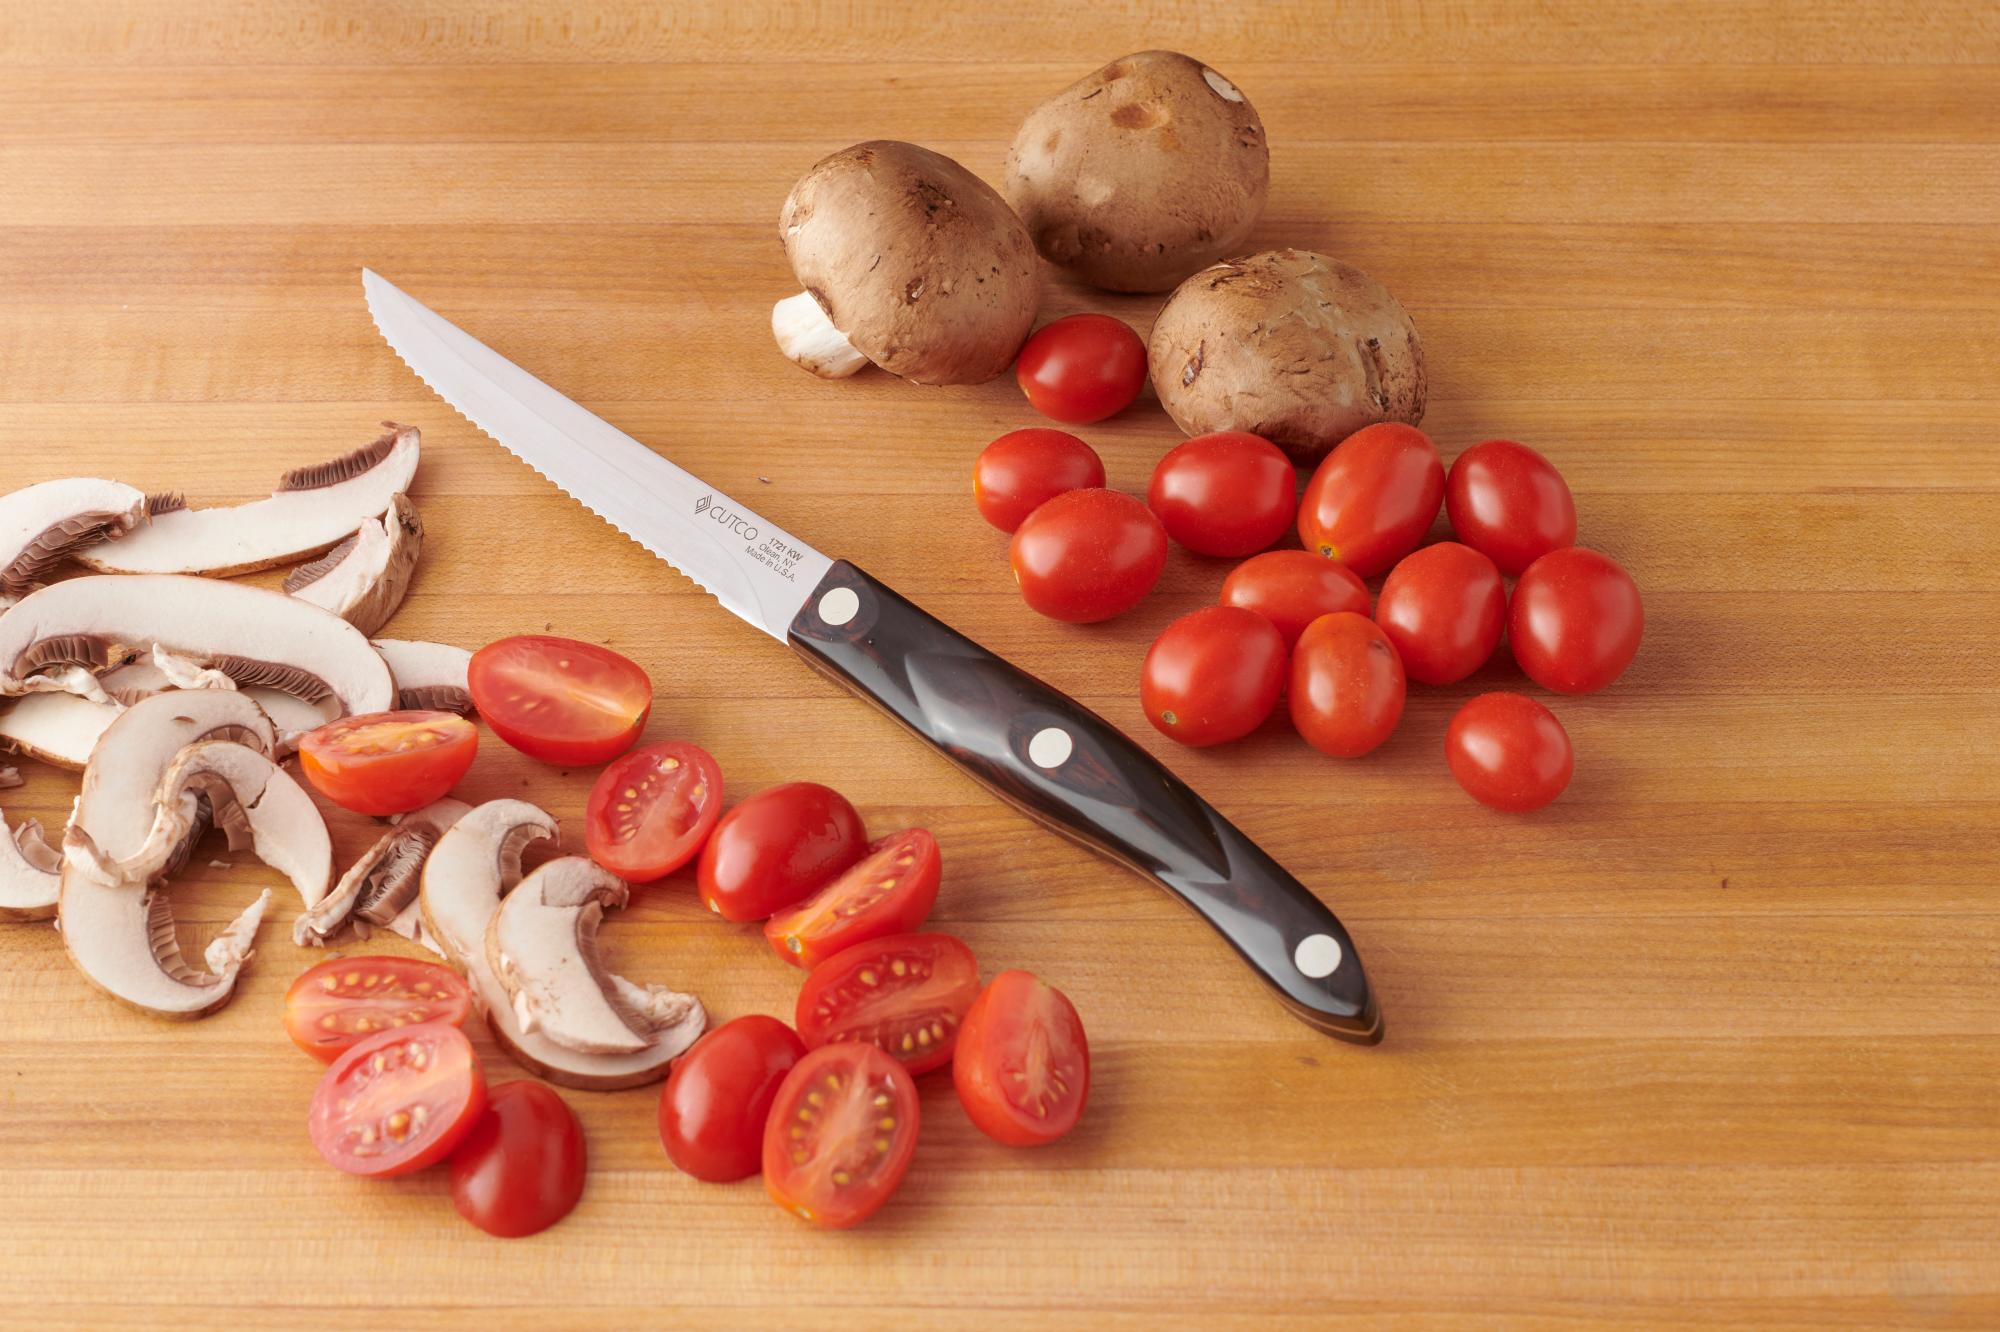 Prepping the tomatoes and mushrooms with a Trimmer.